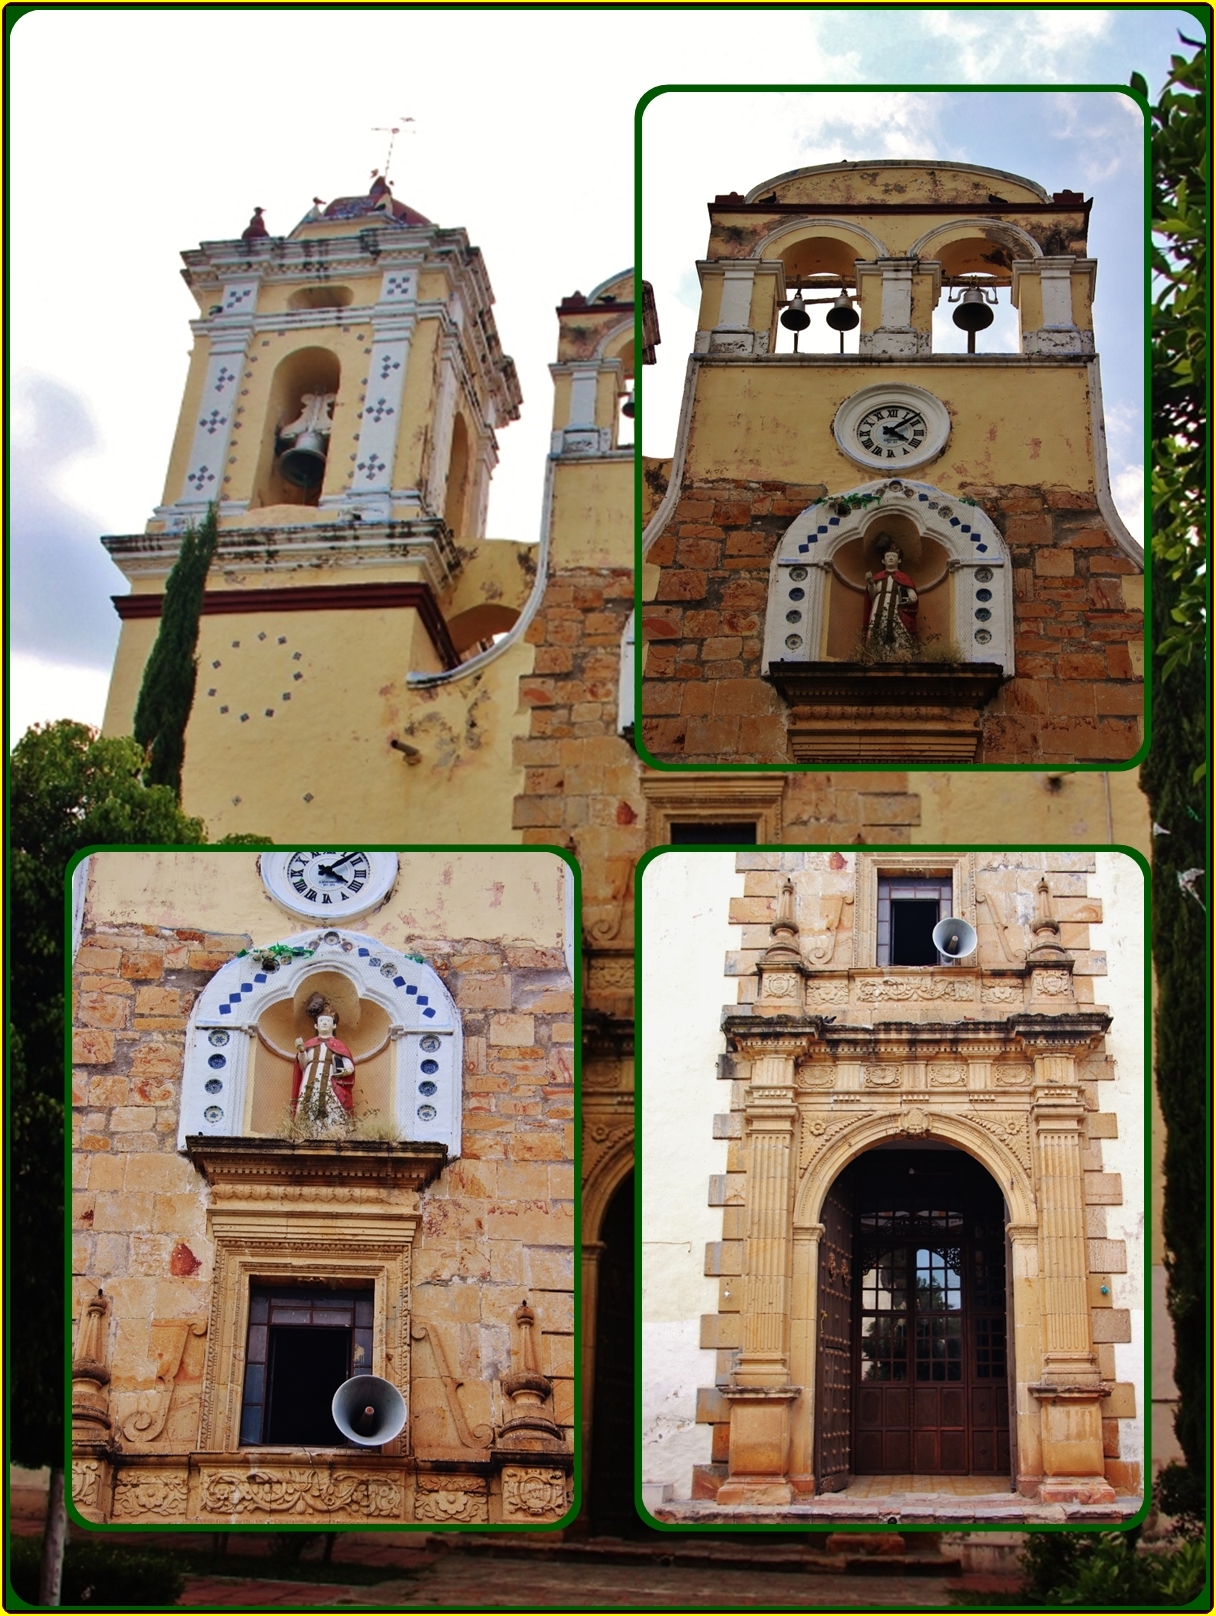 four pictures of an old church tower and bell